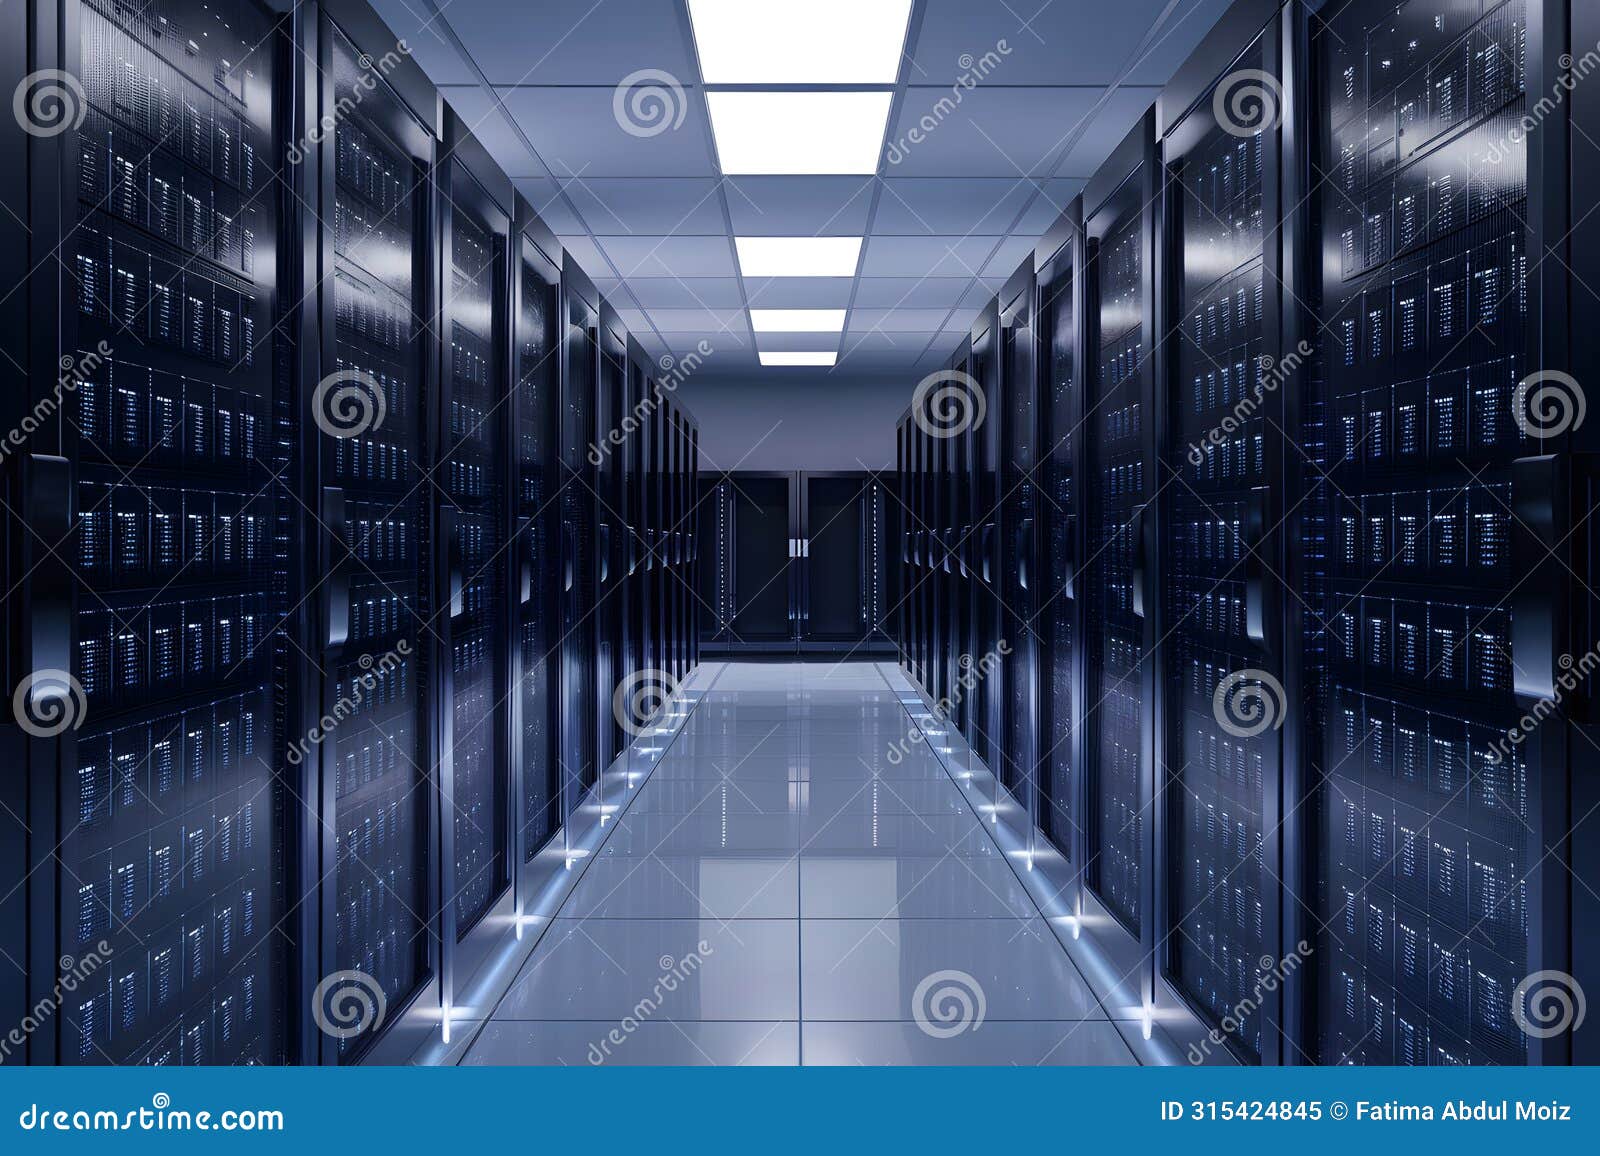 stockphoto modern data center with high powered servers, big data concept